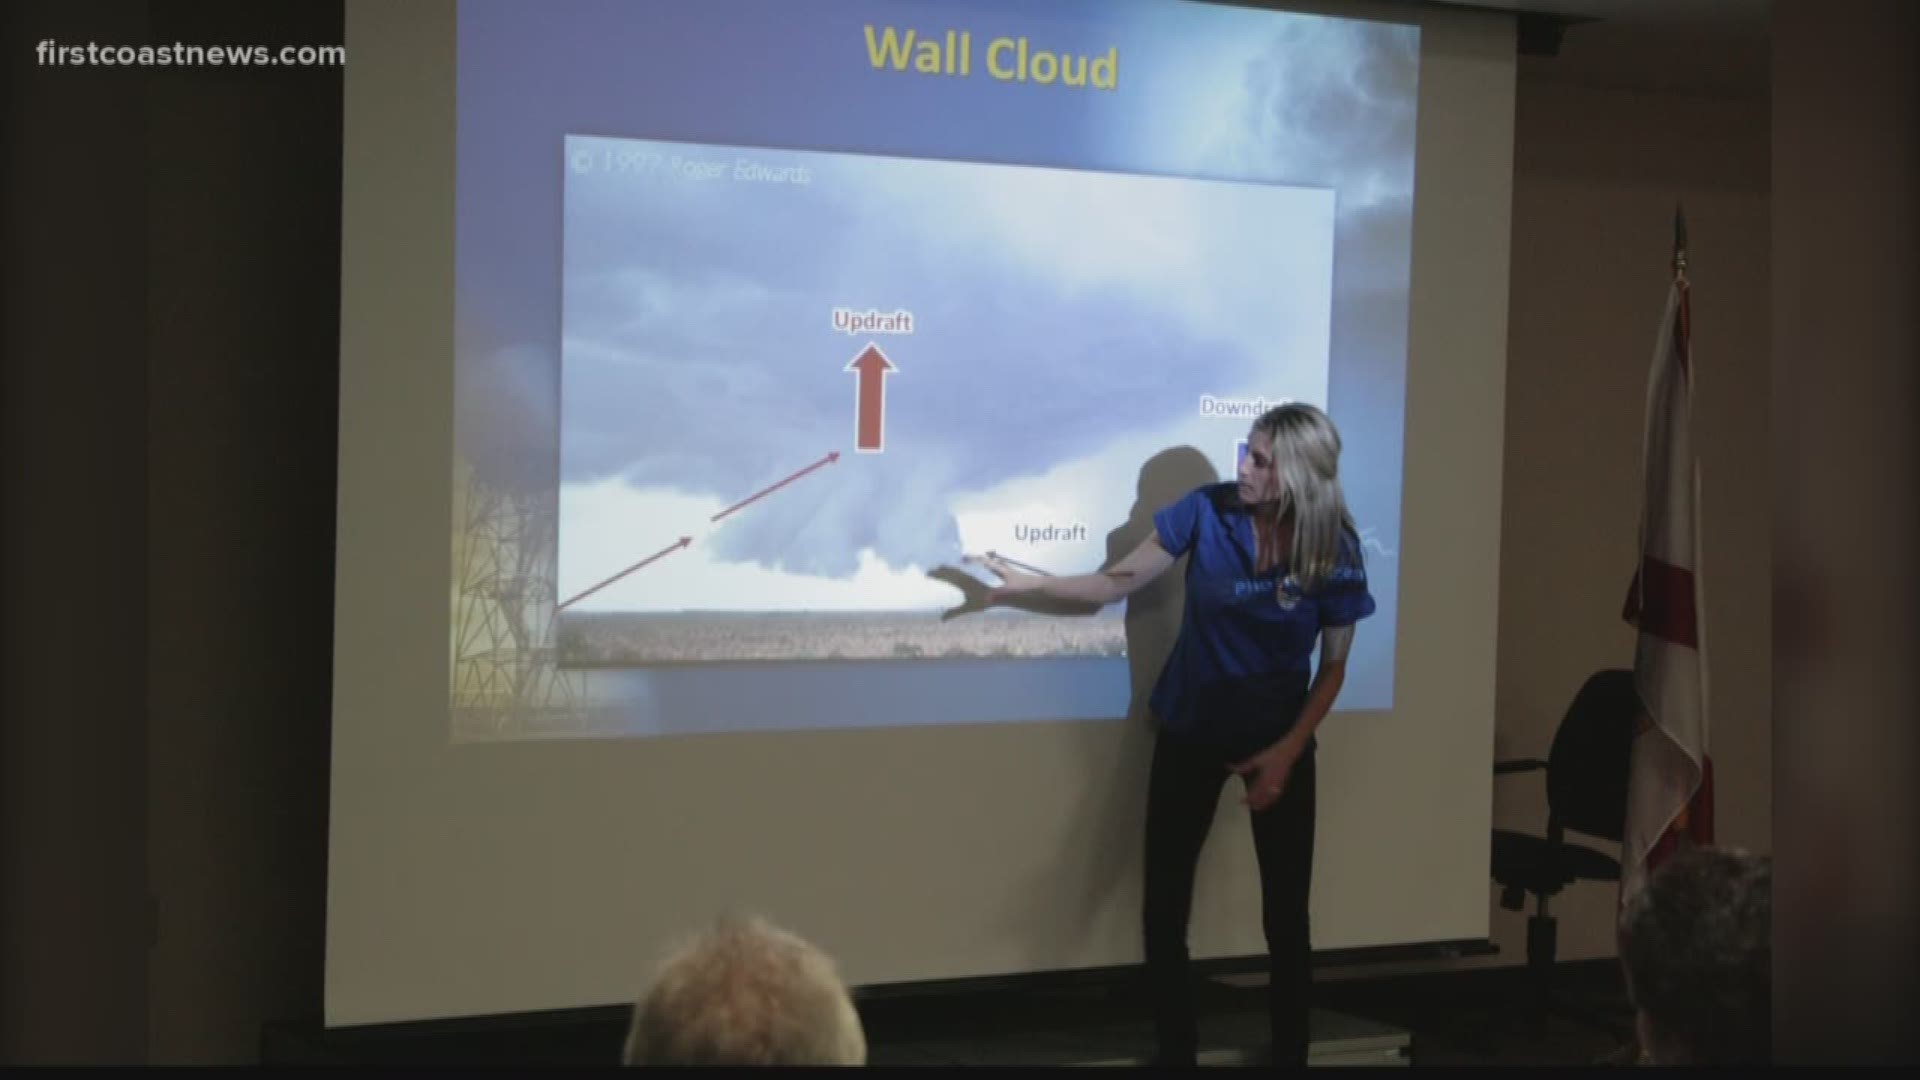 Angie Enyedi, senior meteorologist with the National Weather Service in Jacksonville, will teach the class. It will cover everything from cloud formations to thunder